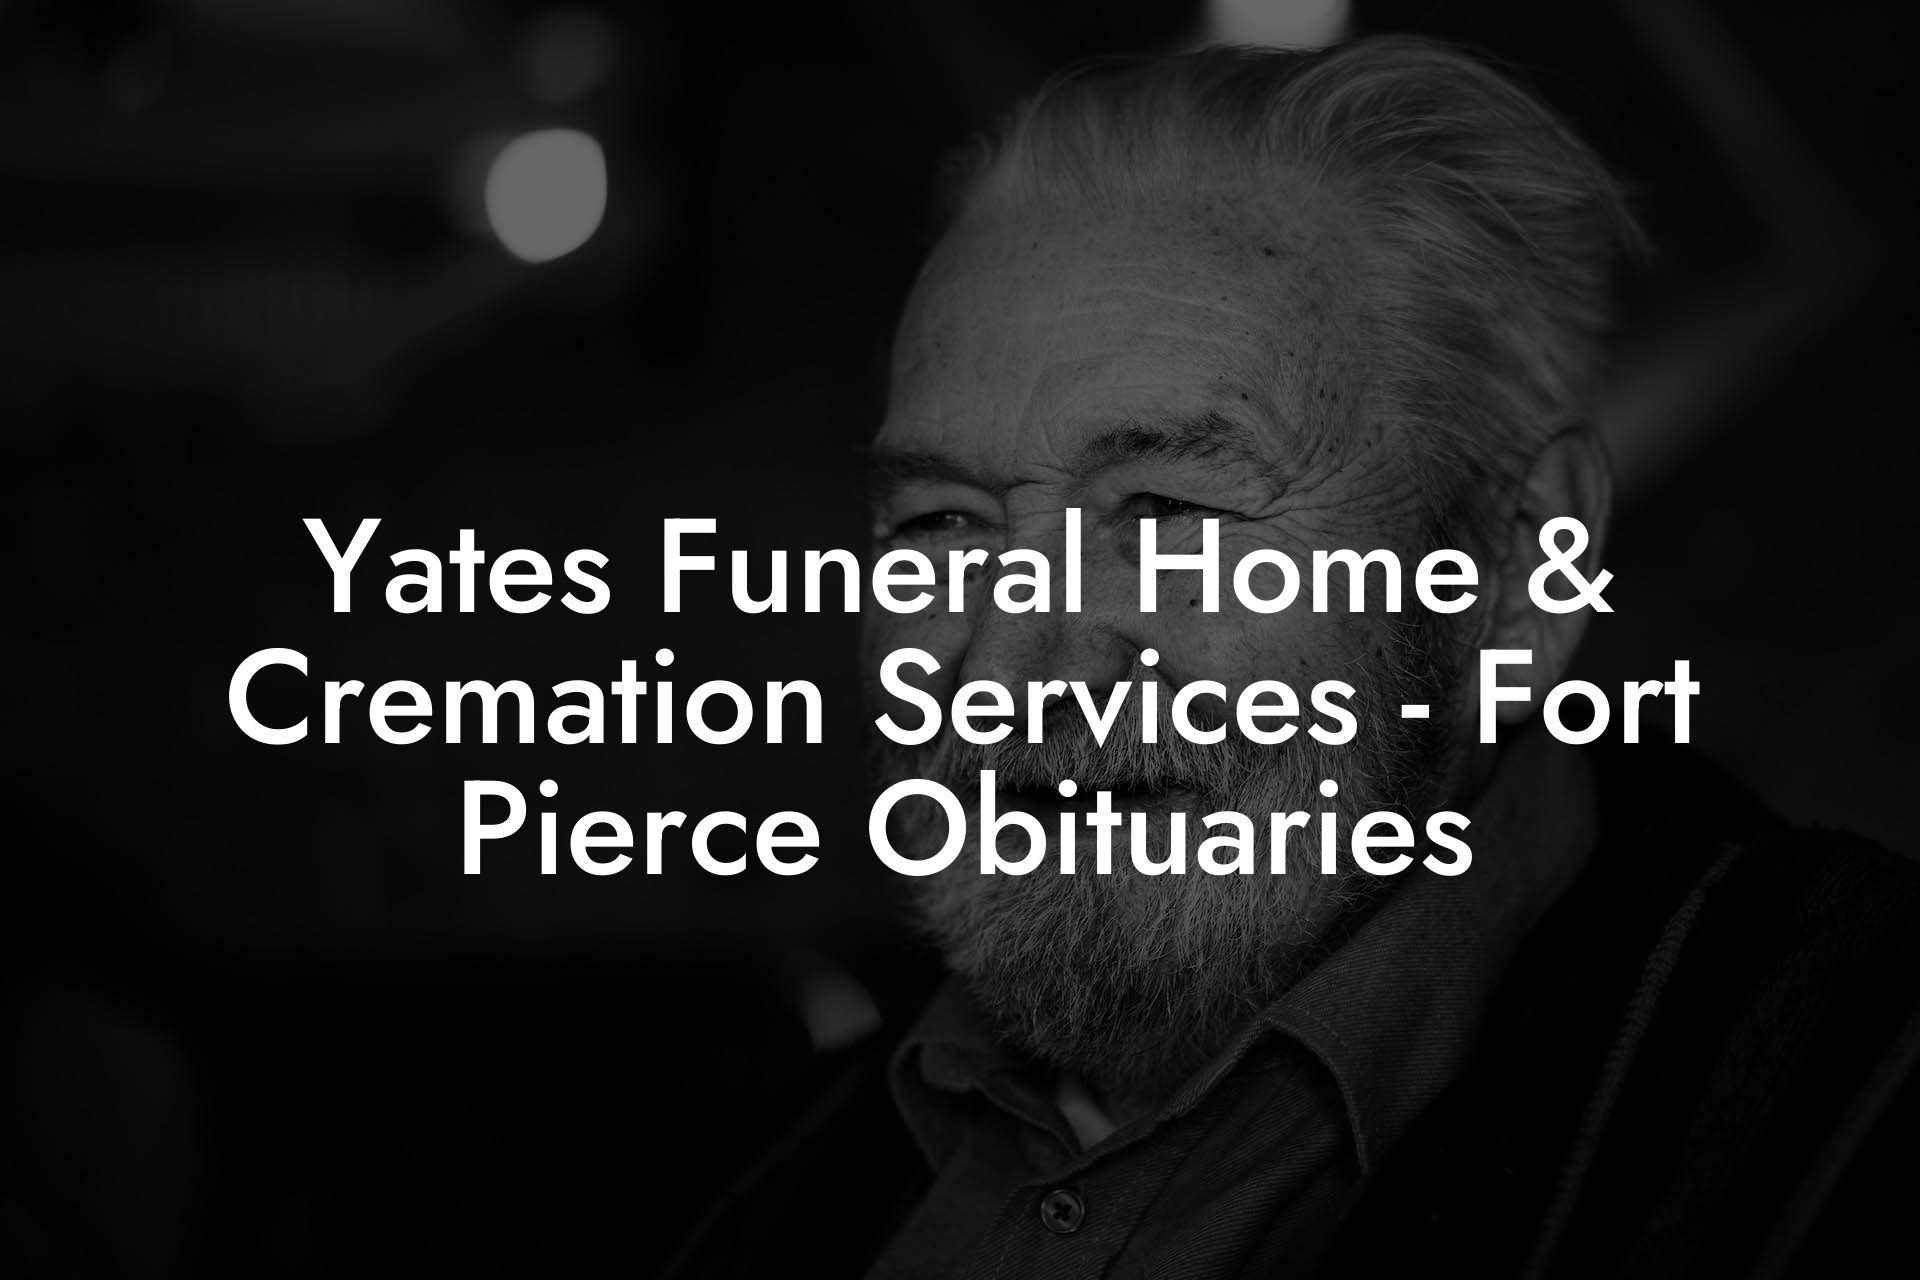 Yates Funeral Home & Cremation Services - Fort Pierce Obituaries